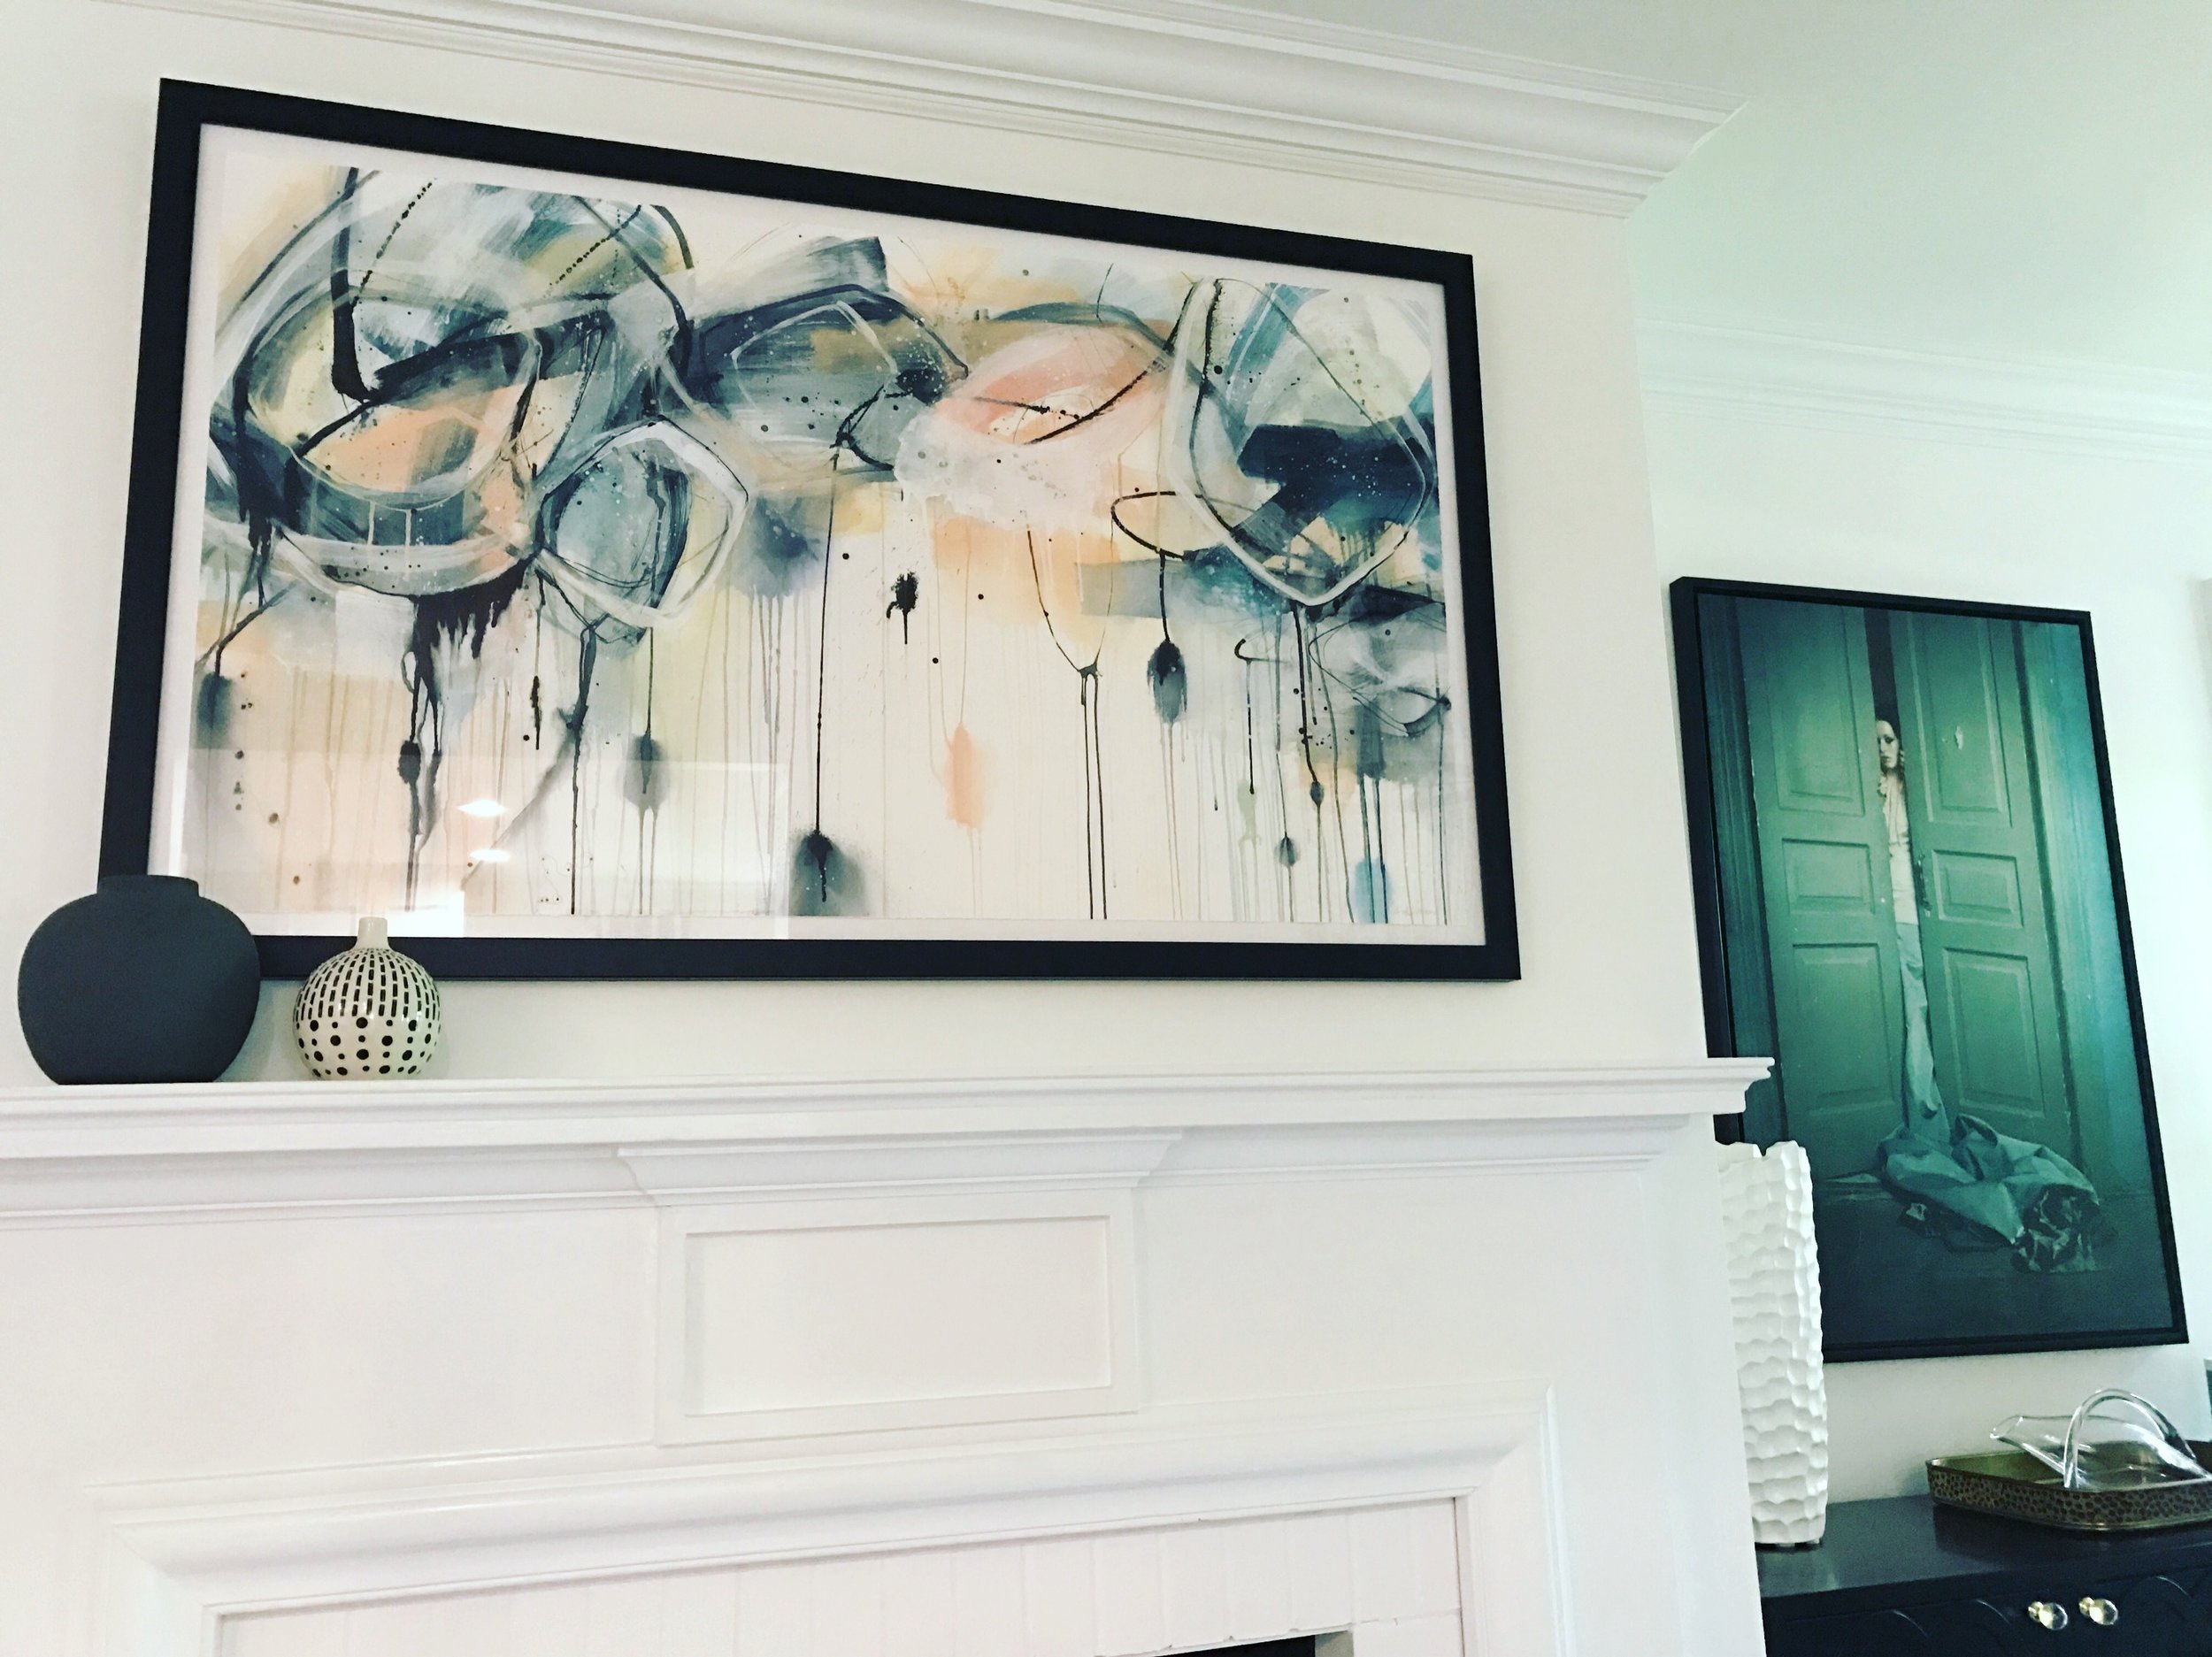  commission for private residence in Charlotte, NC     Art House Charlotte    for    Four Story Interiors   